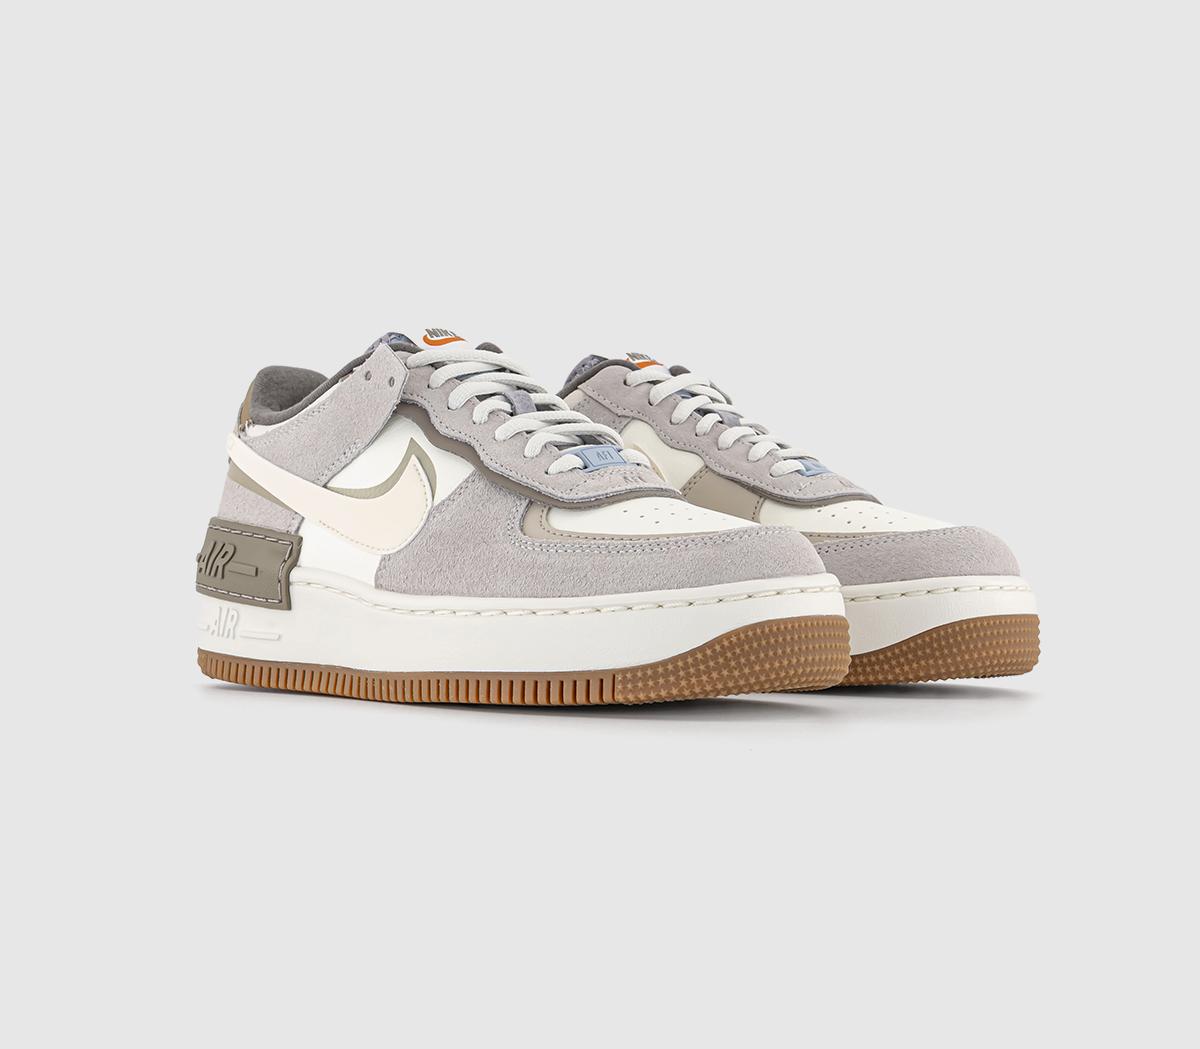 Nike Air Force 1 Shadow Trainers Sail Pale Ivory Sail Grey Fog Provence Purple Cave, 7